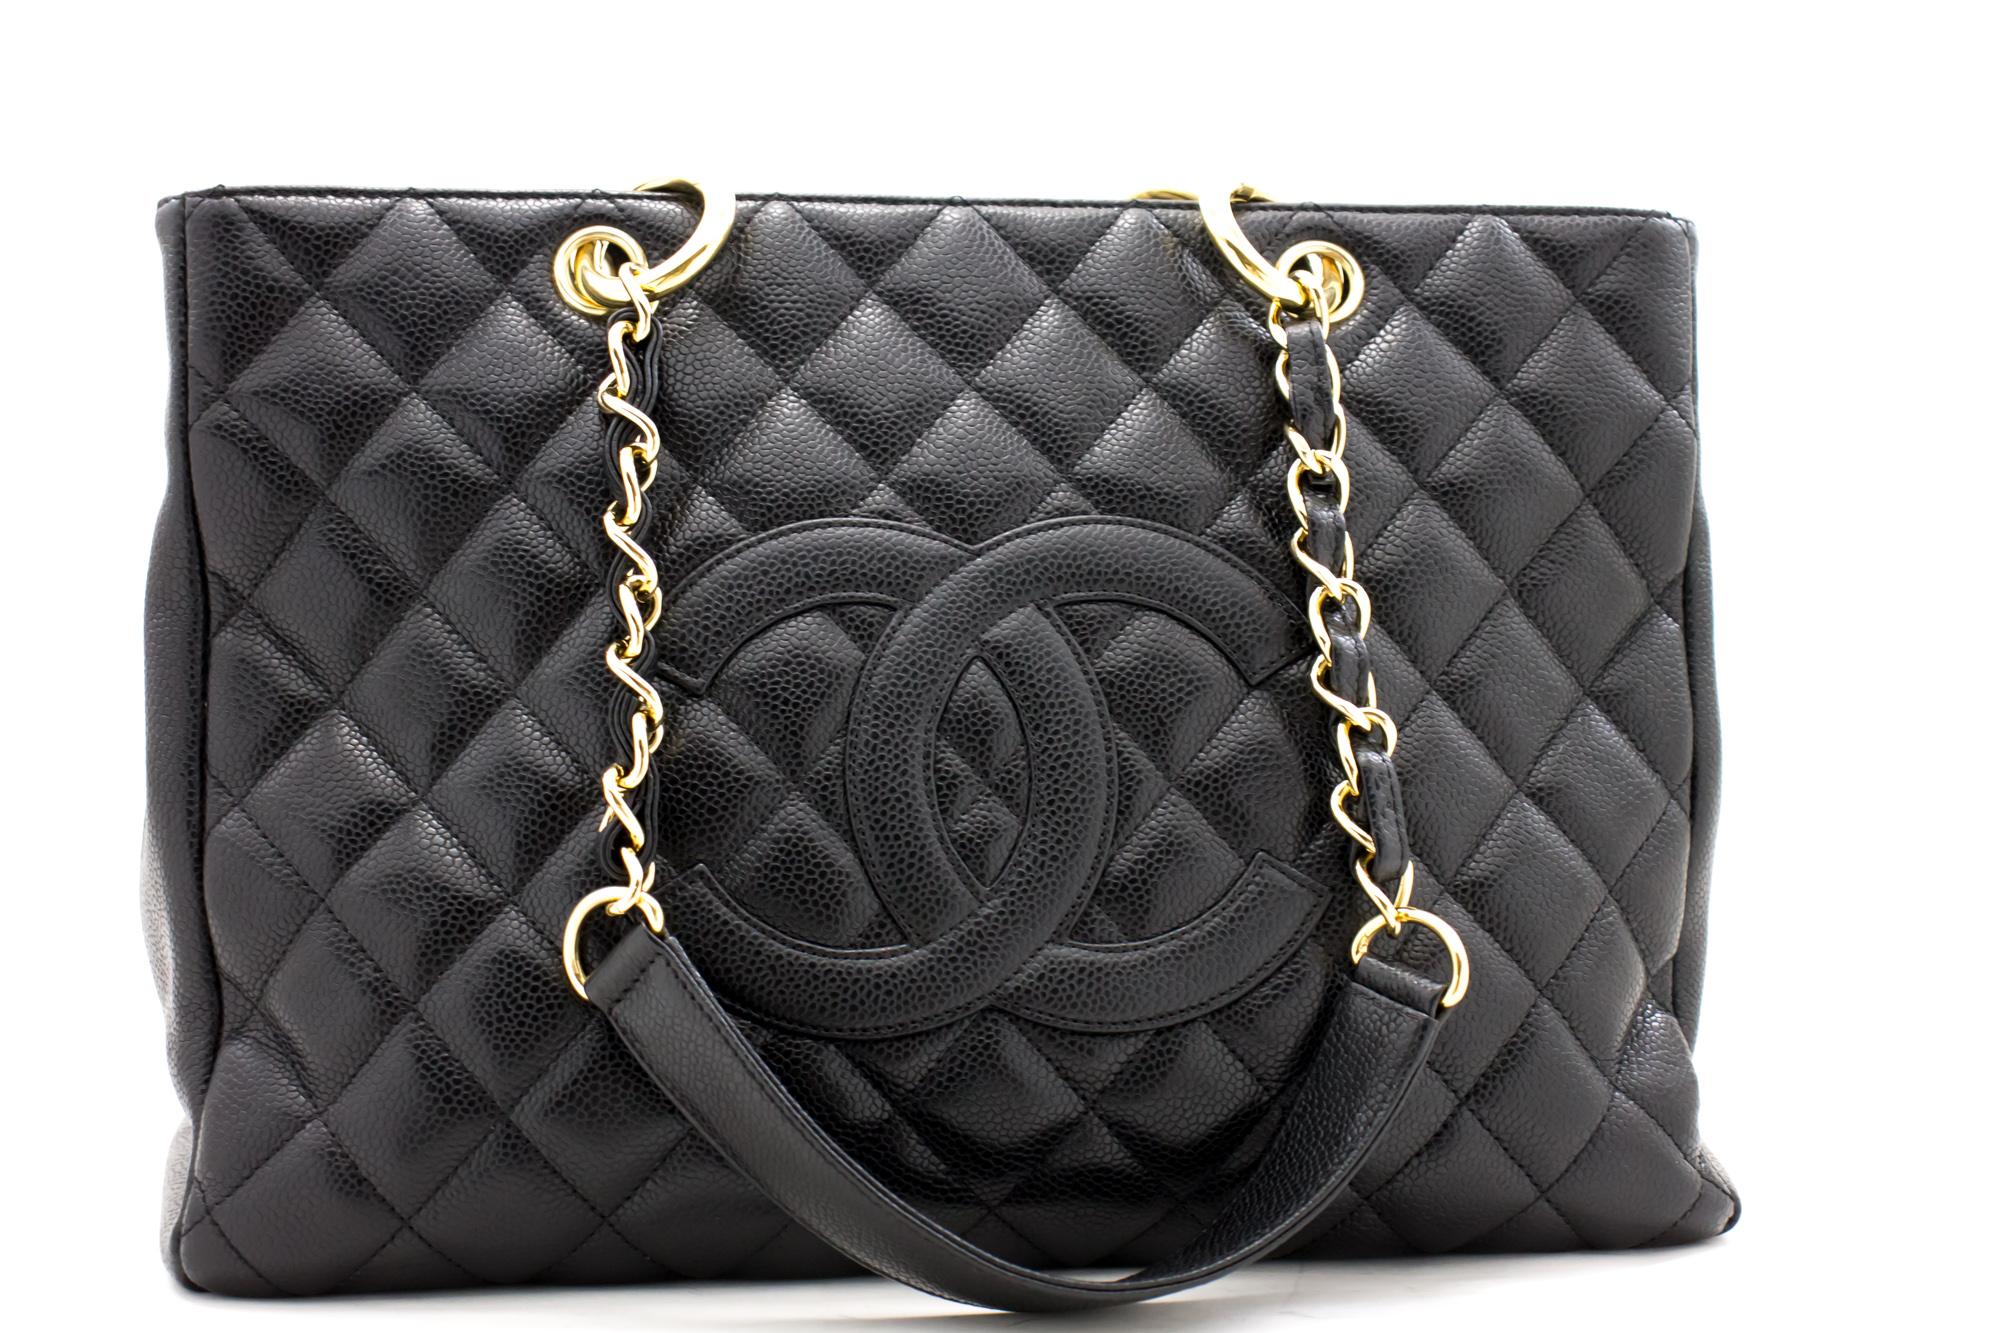 An authentic CHANEL Caviar GST 13